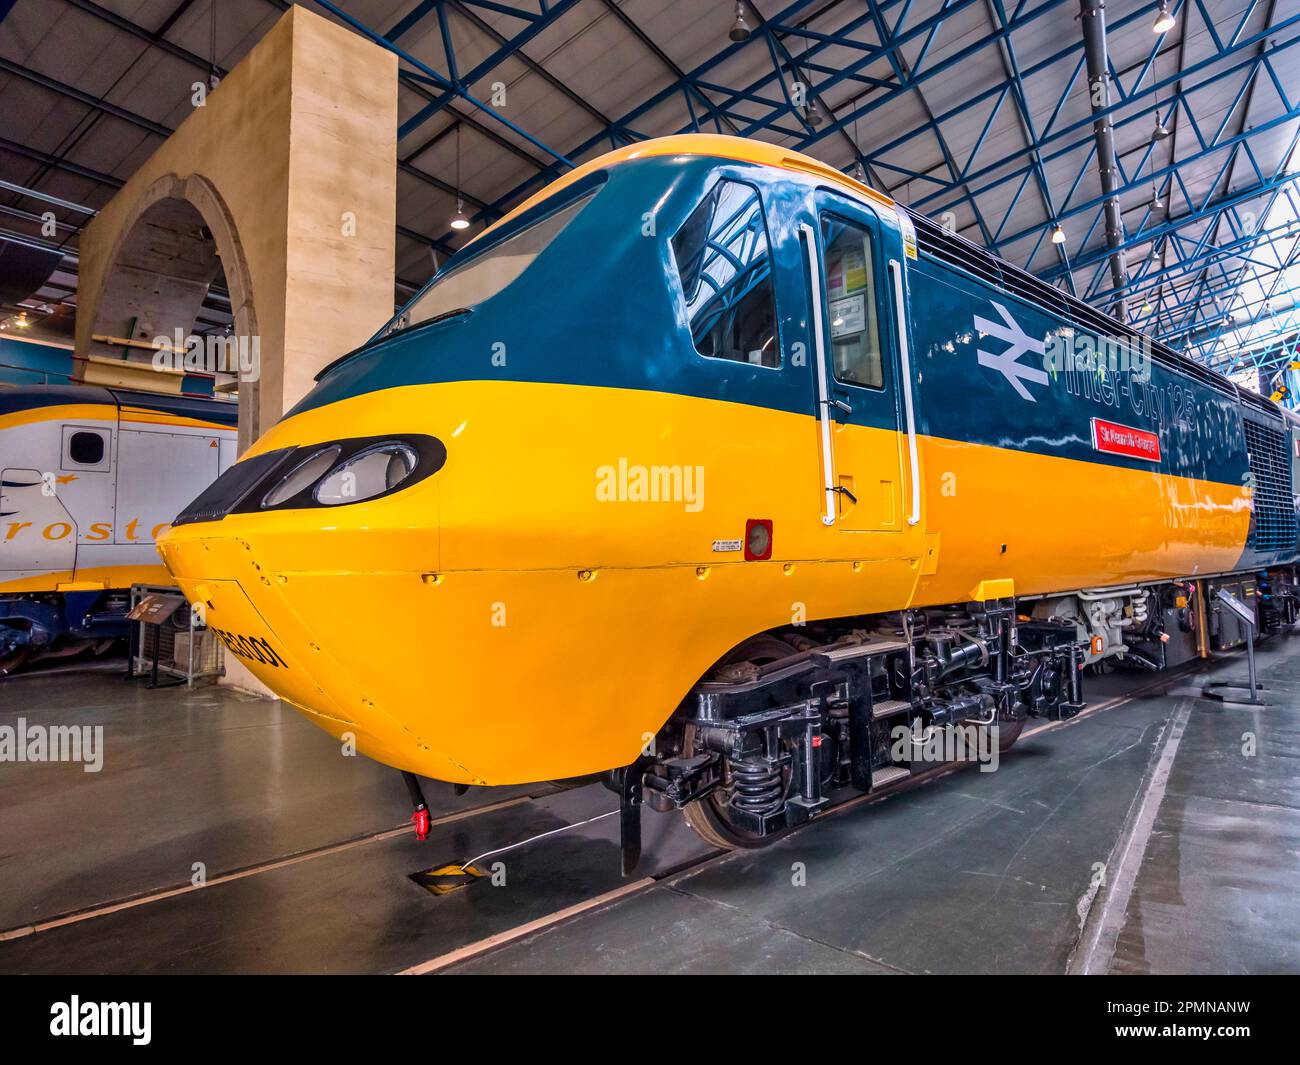 General image inside the National Railway Museum in York seen here overlooking the great hall that features two of the Inter-City 125 diesel trains Stock Photo